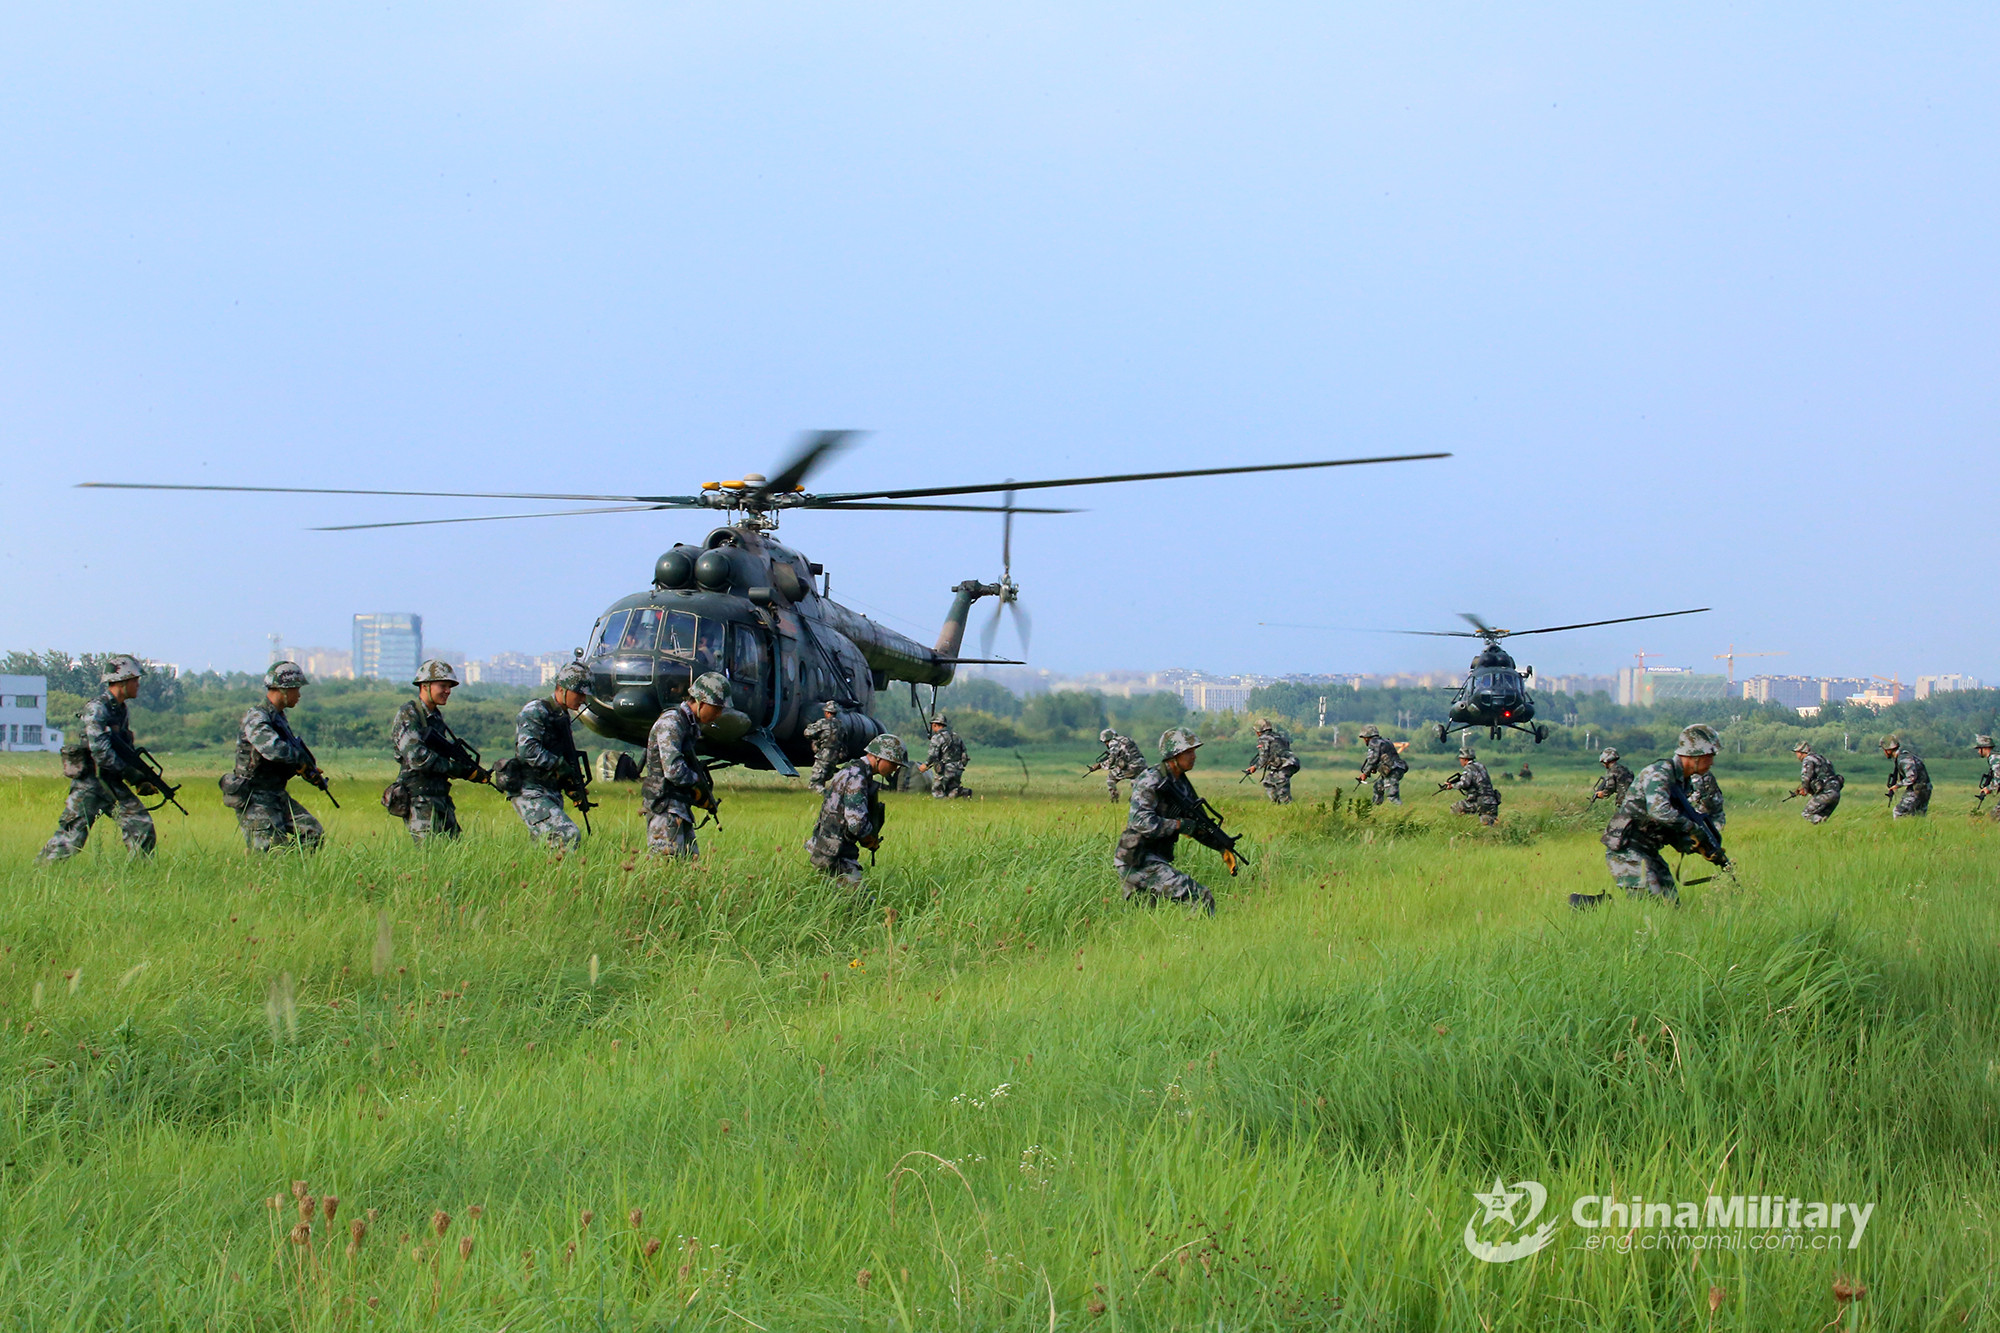 Special operations soldiers fast-rope from helicopters - Photos